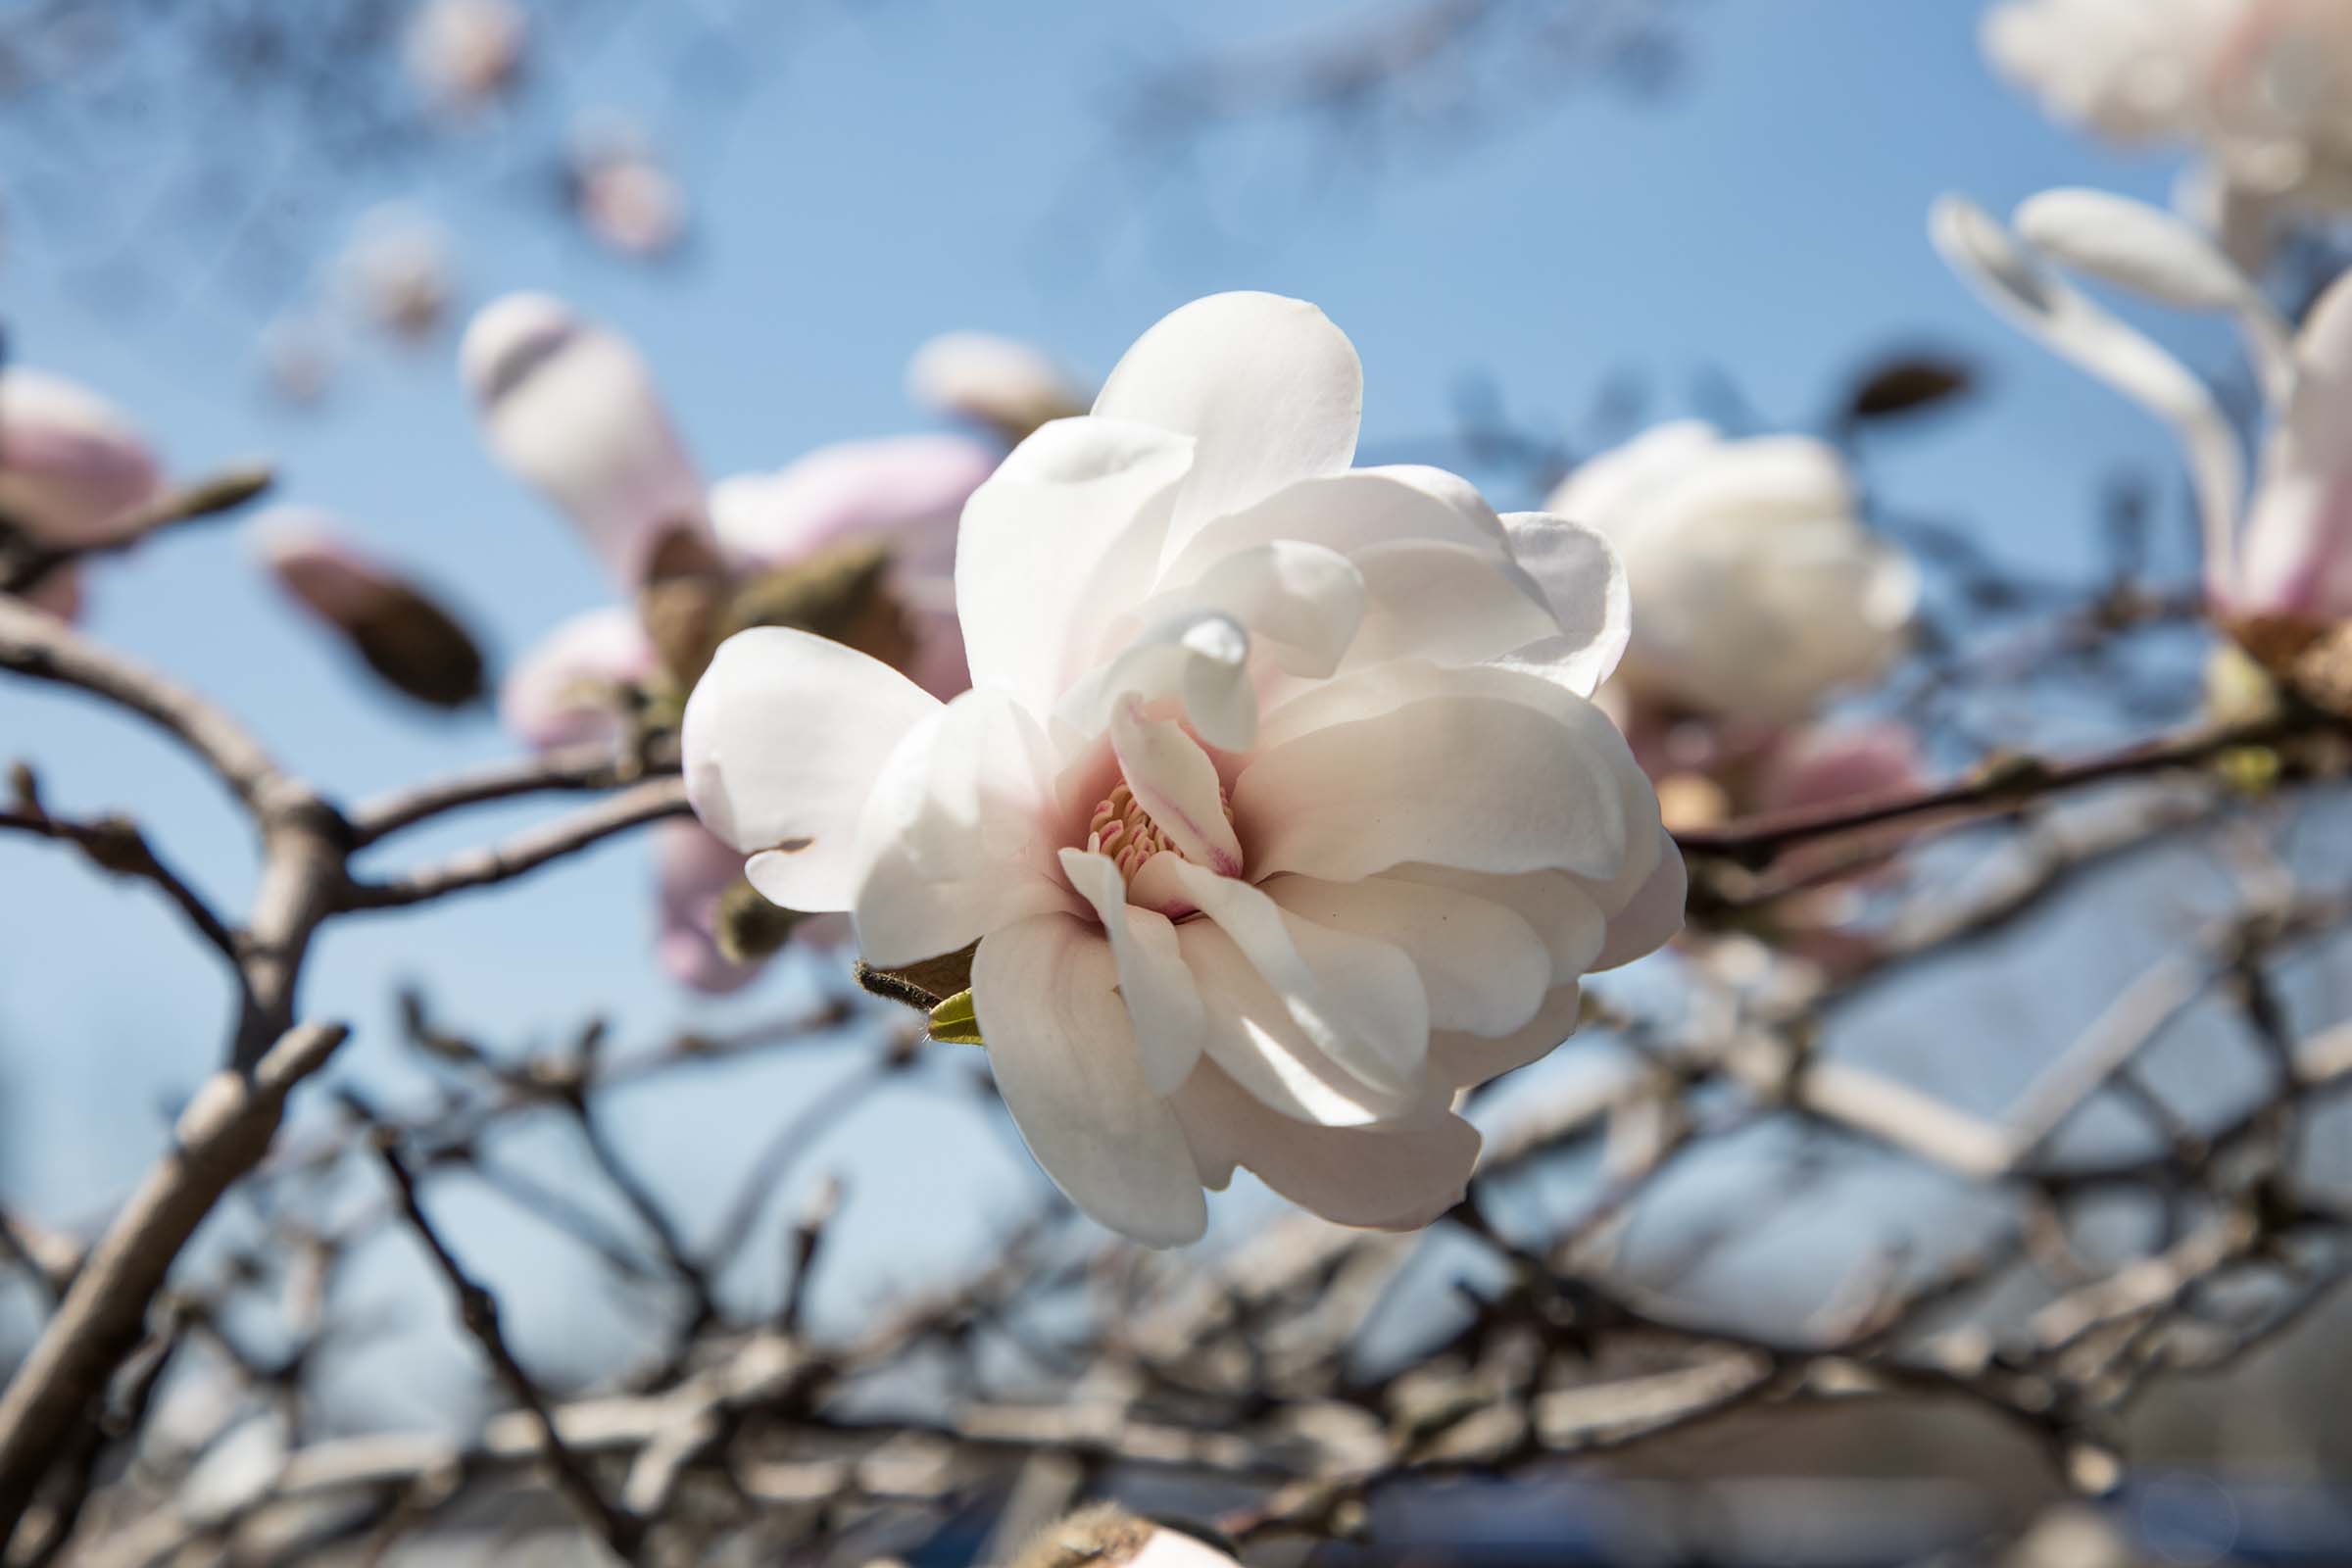 The bloom of the magnolia is white with a pink hue in the center